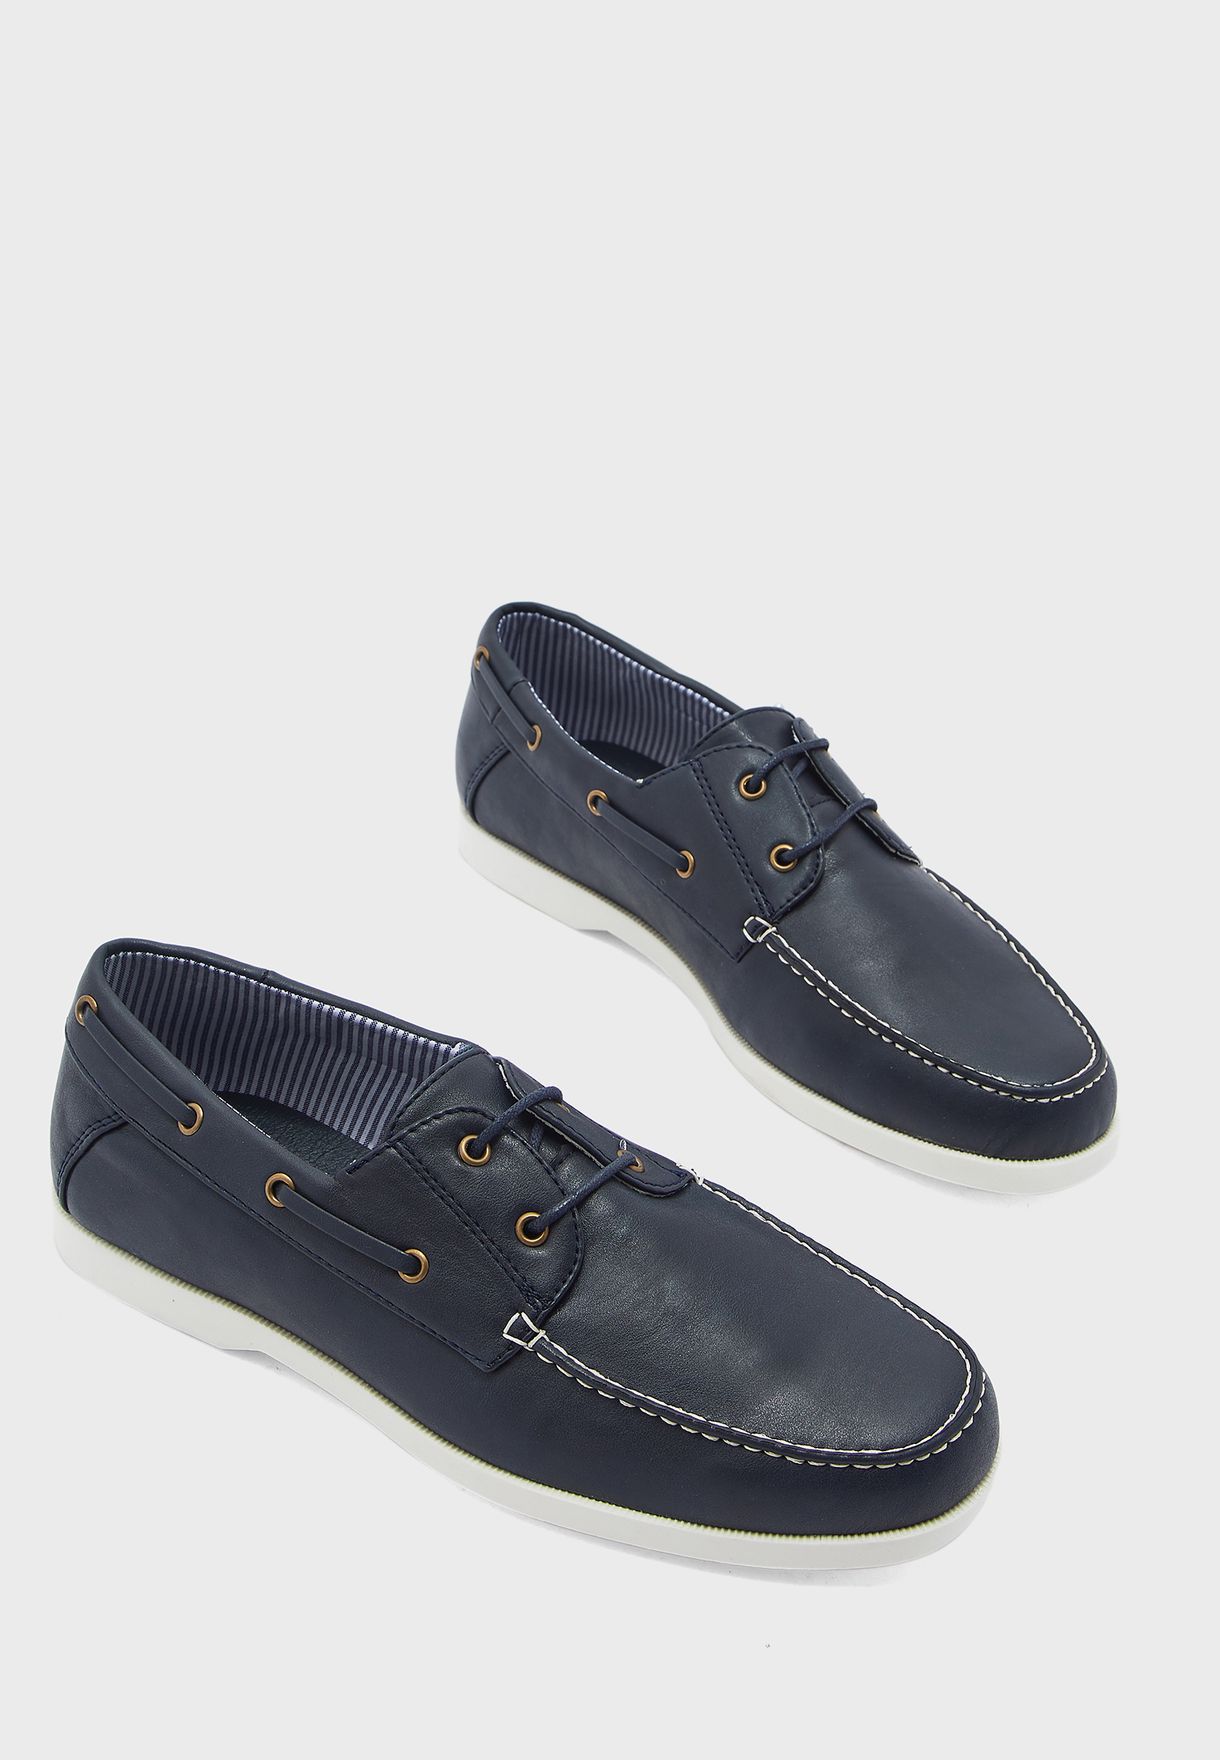 slip on shoes new look